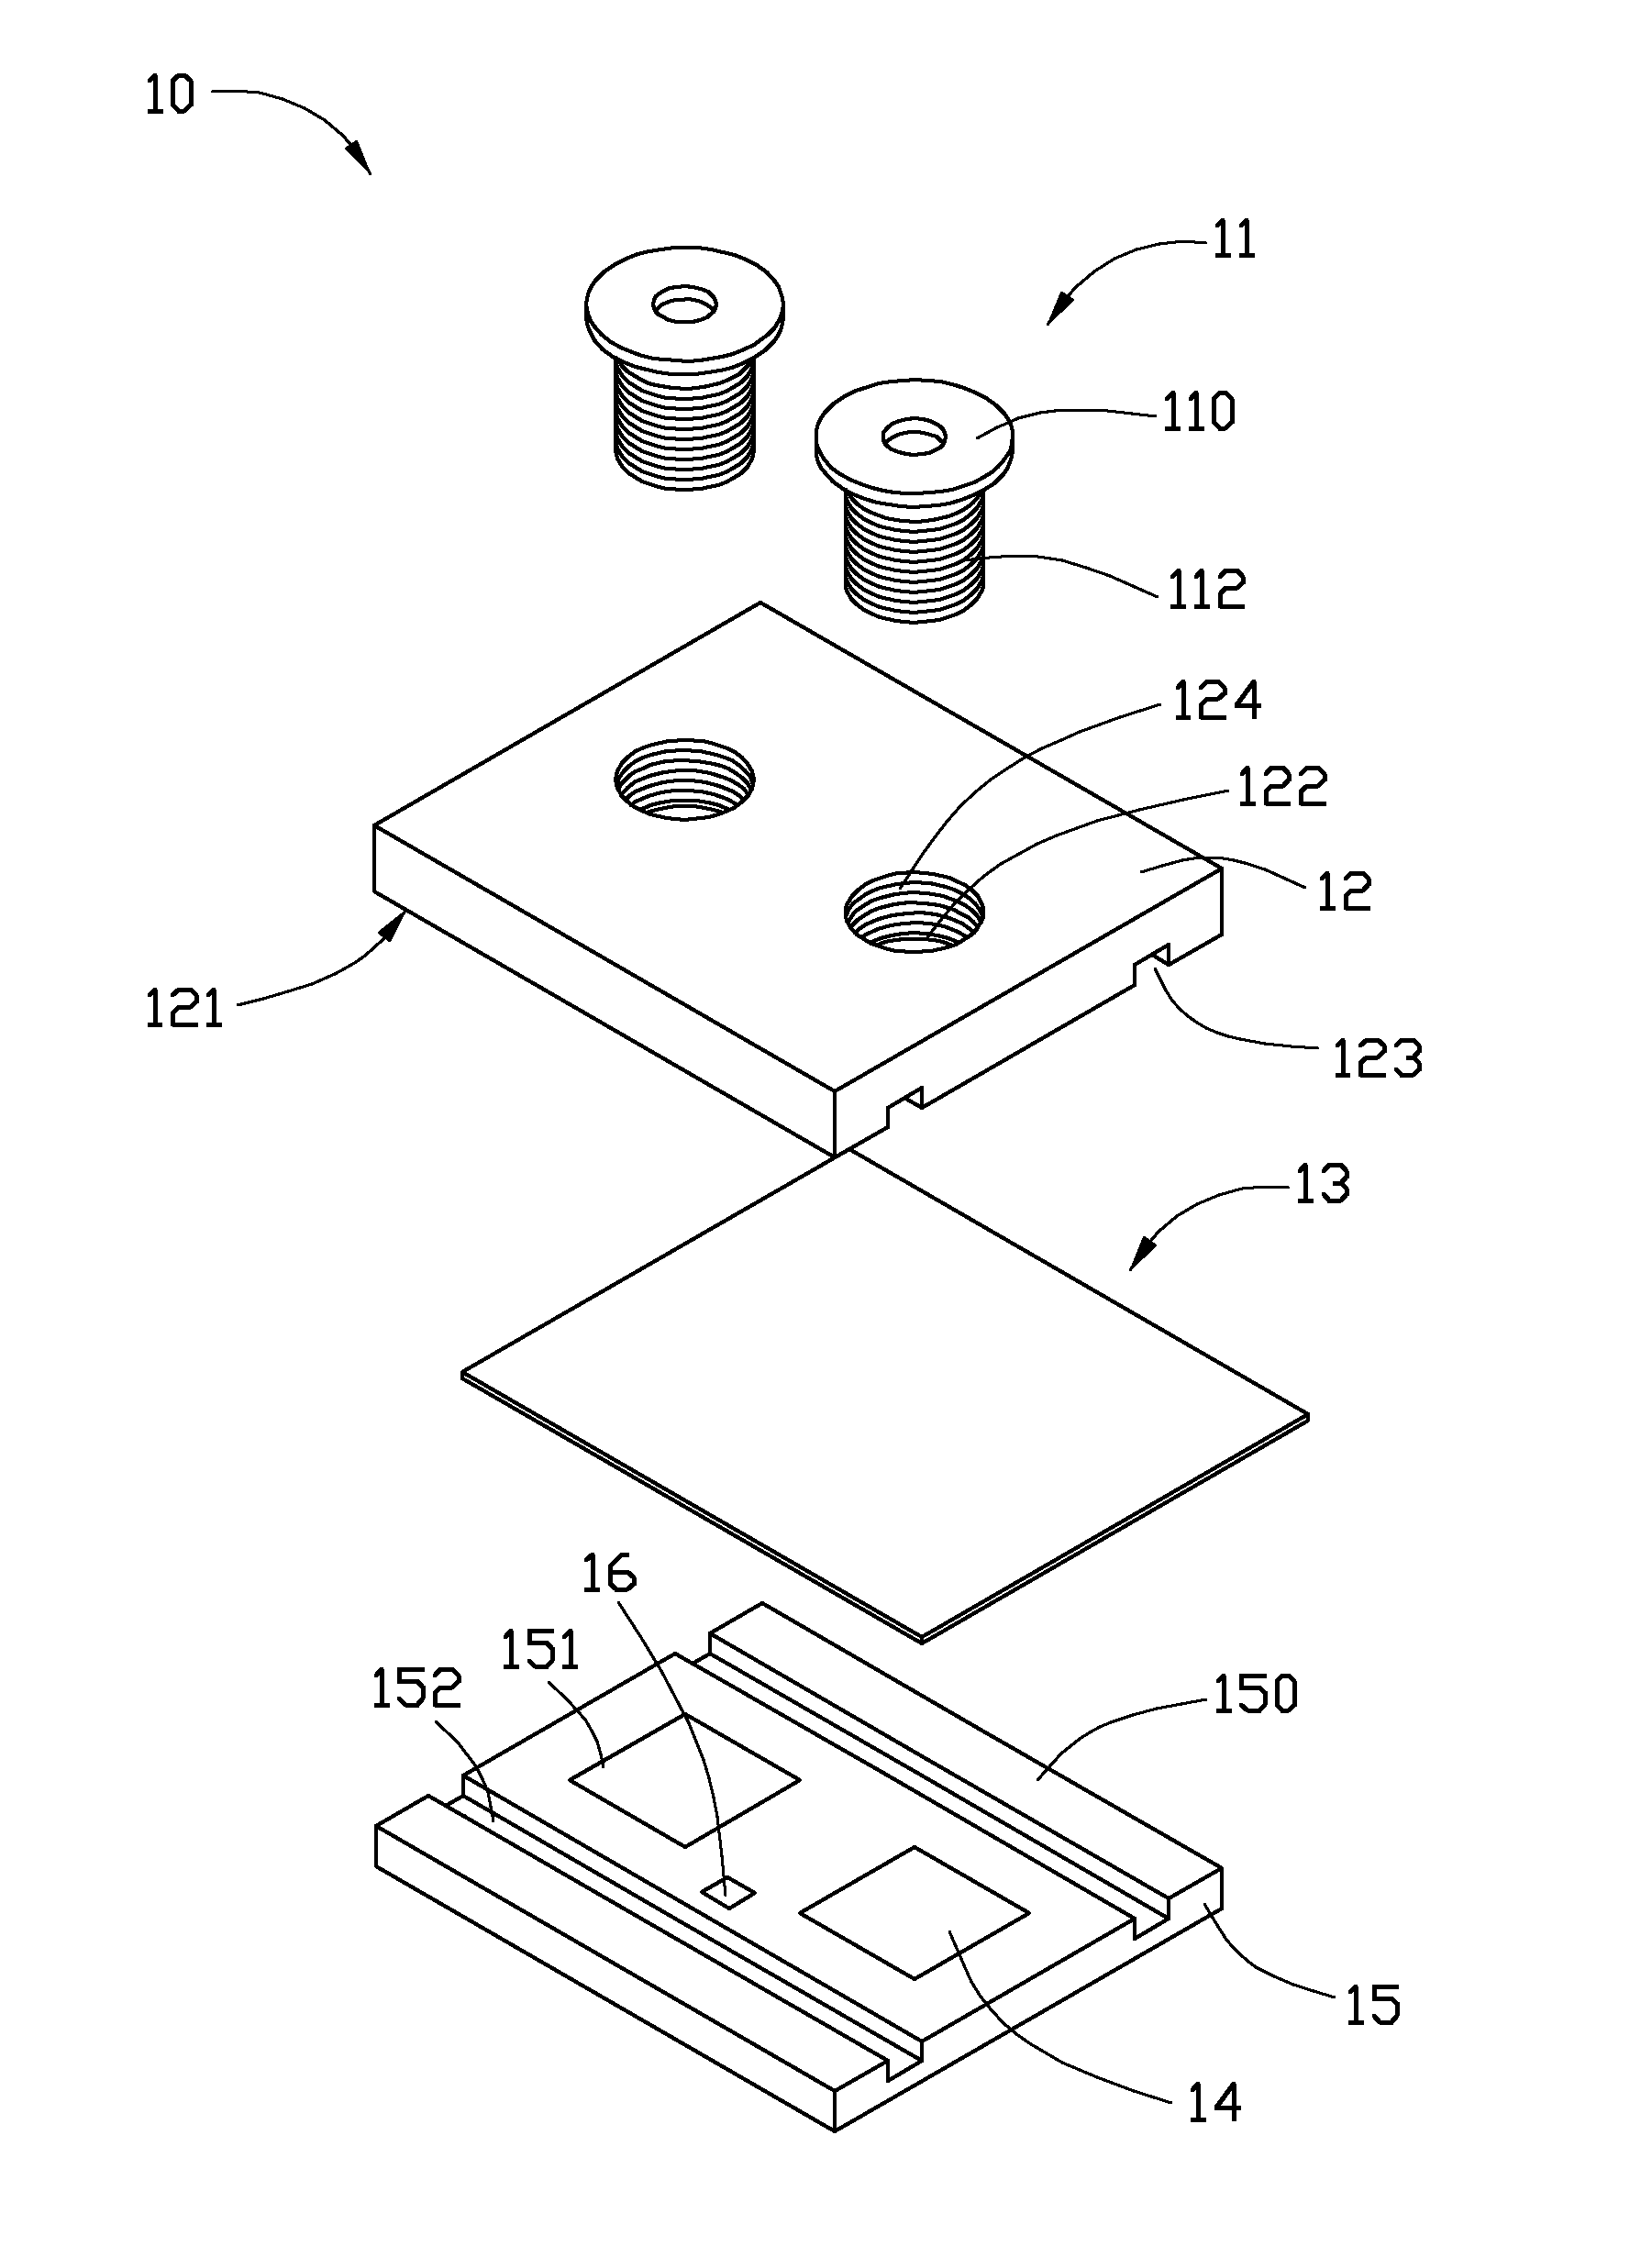 Camera module array for obtaining compound images